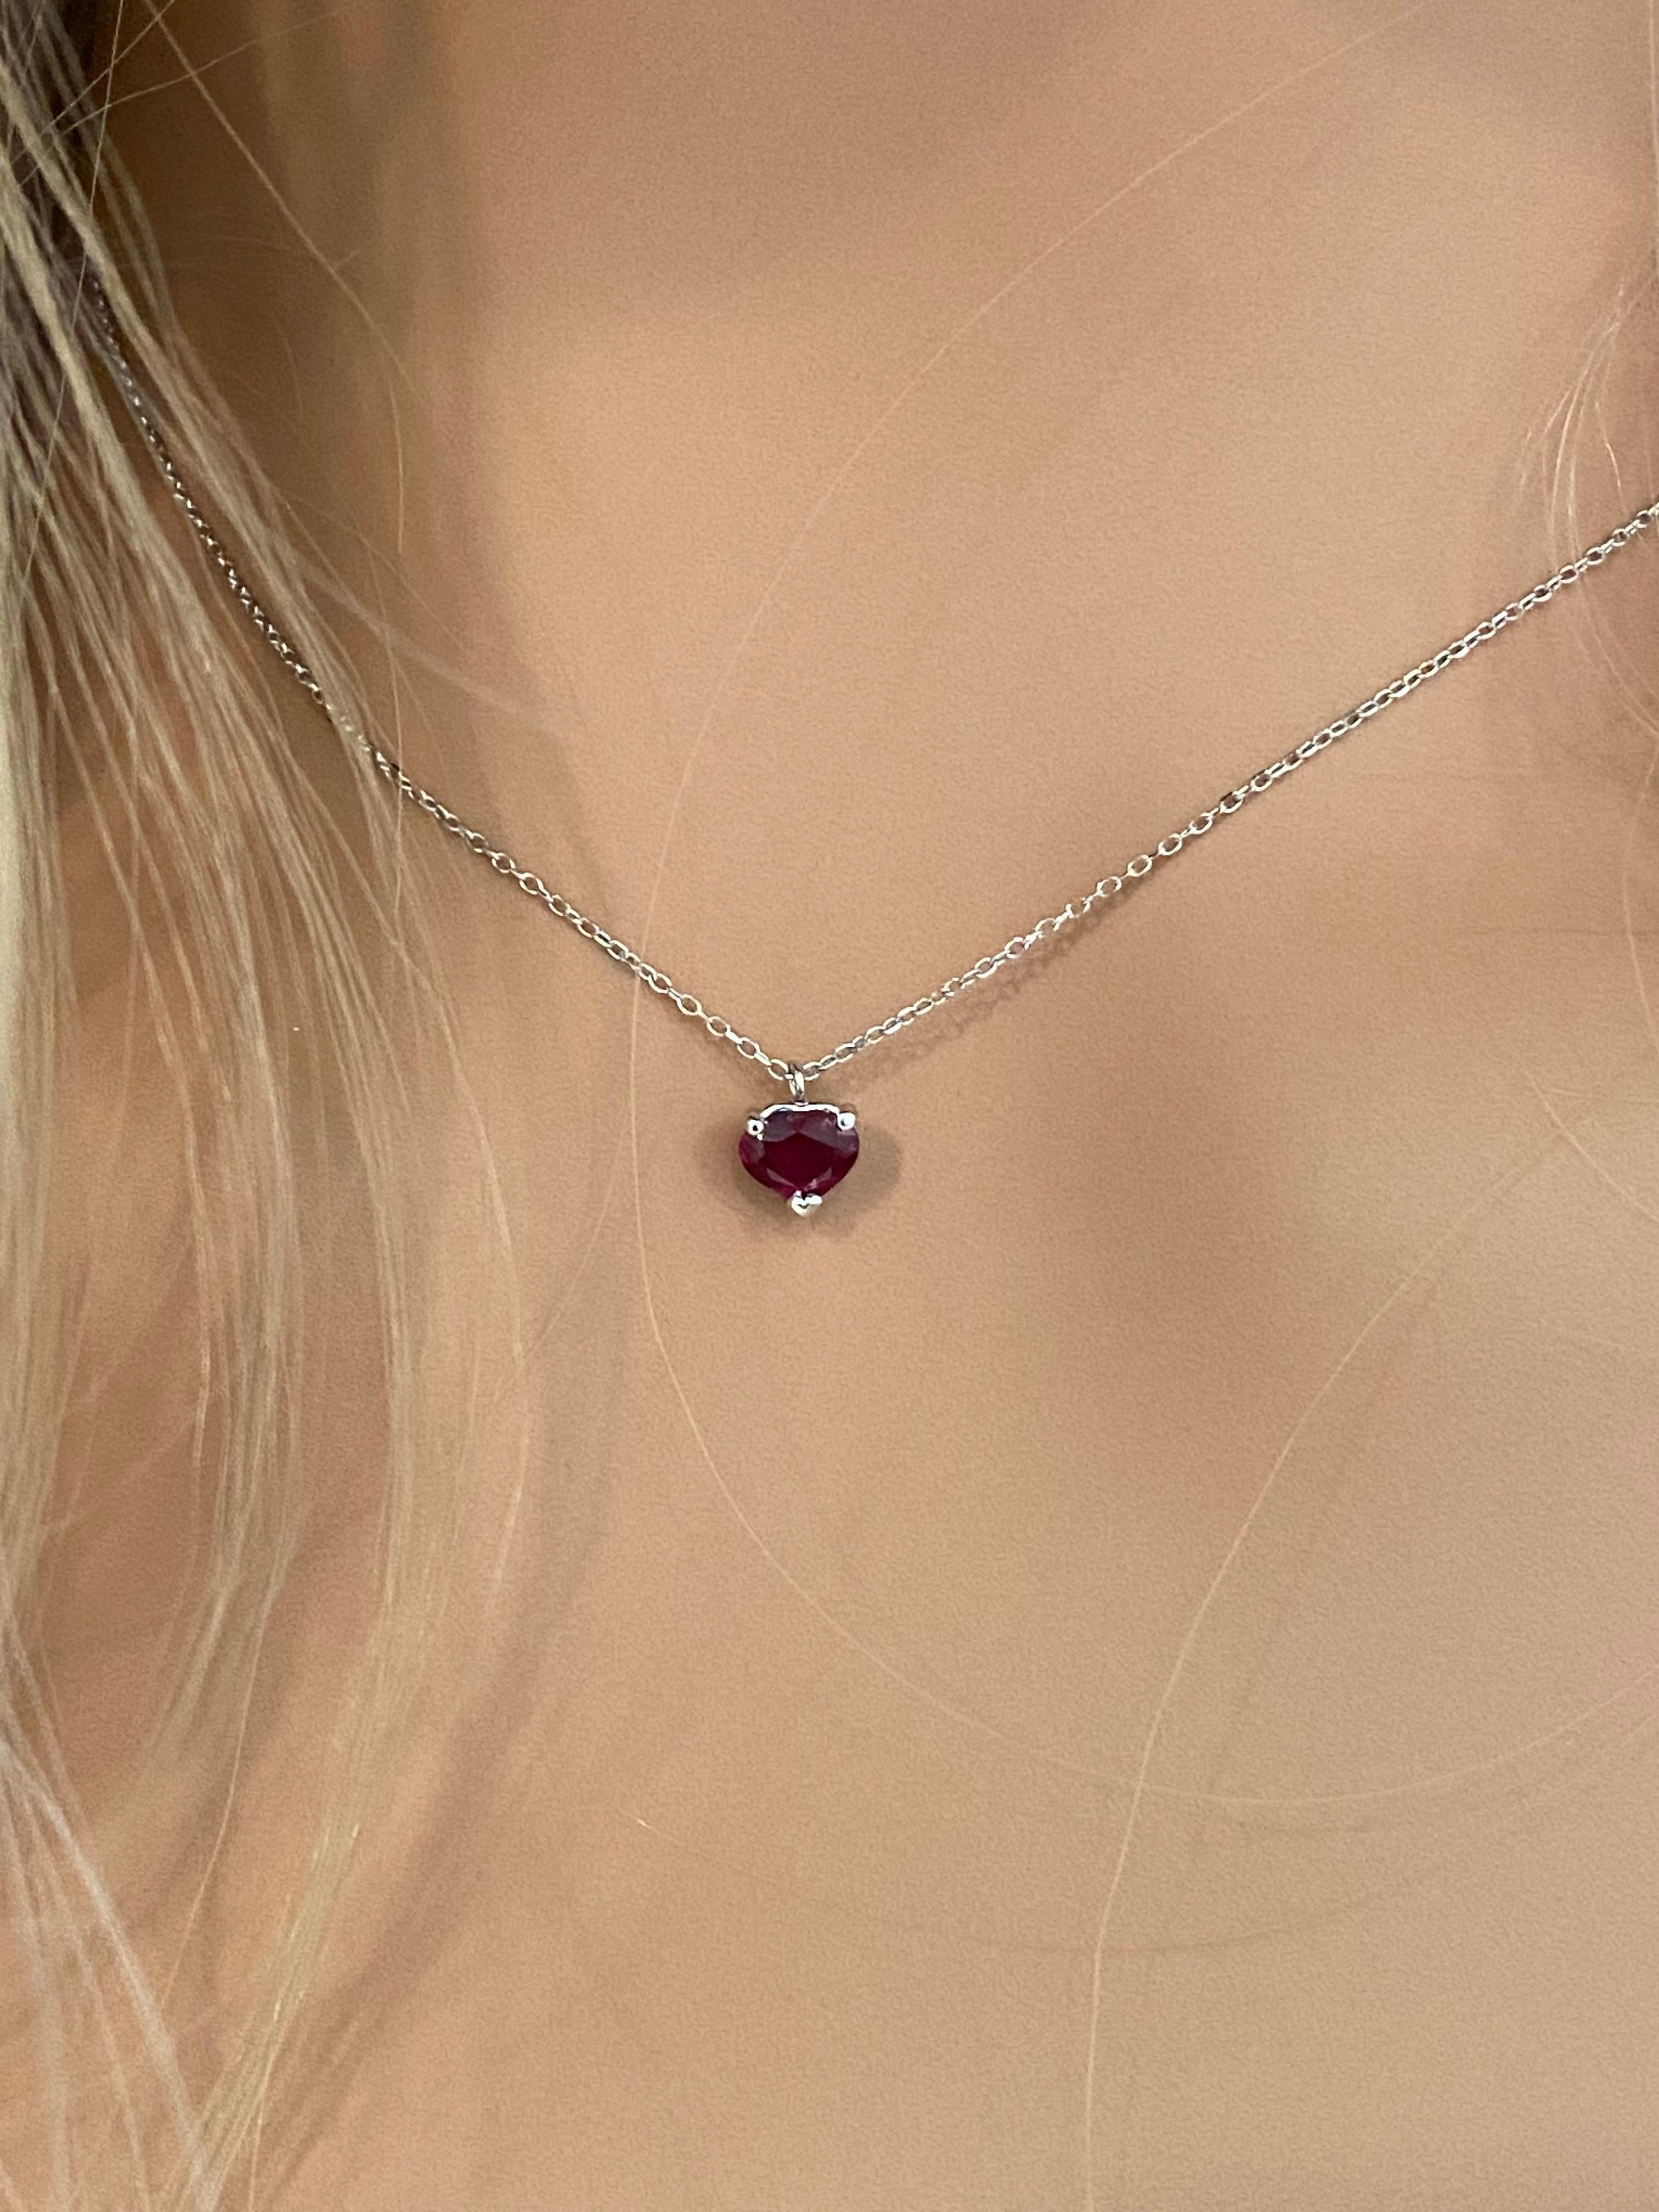 Modernist White Gold Heart Shape Red Burma Ruby Drop Necklace Pendant